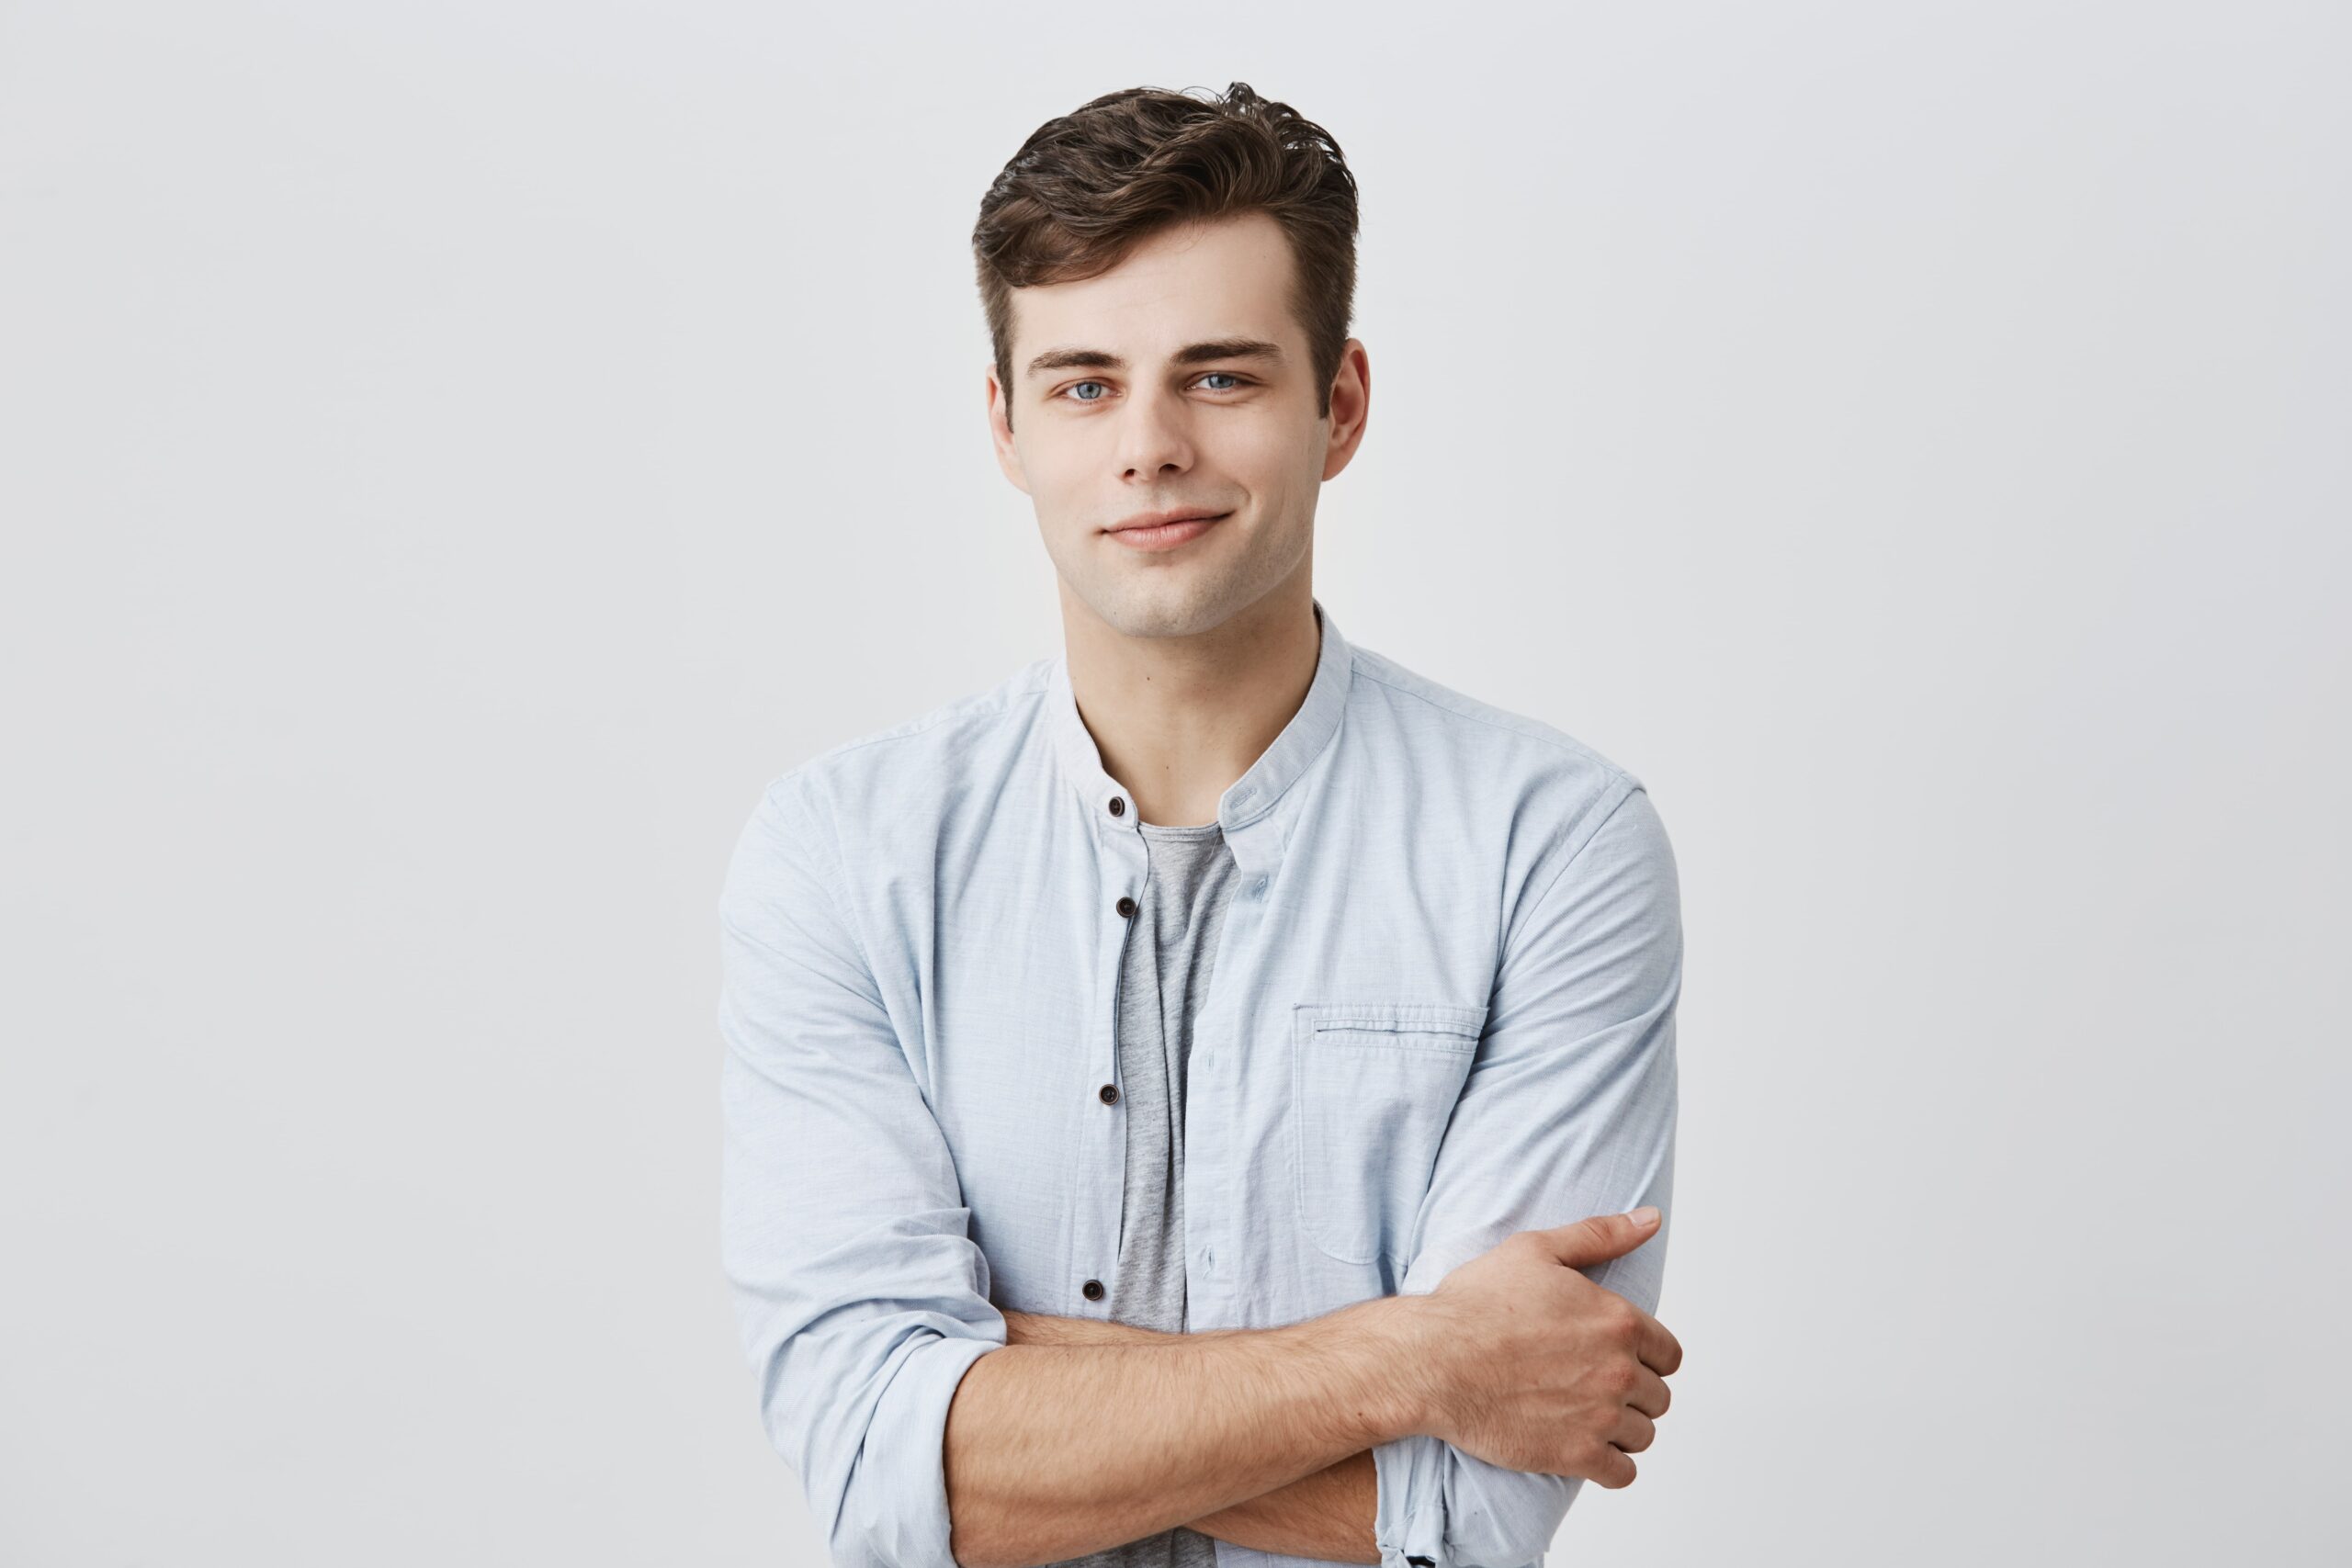 handsome attractive young european man casual shirt with dark hair blue eyes keeping arms folded confidently looking with pleasant smile face expression min scaled